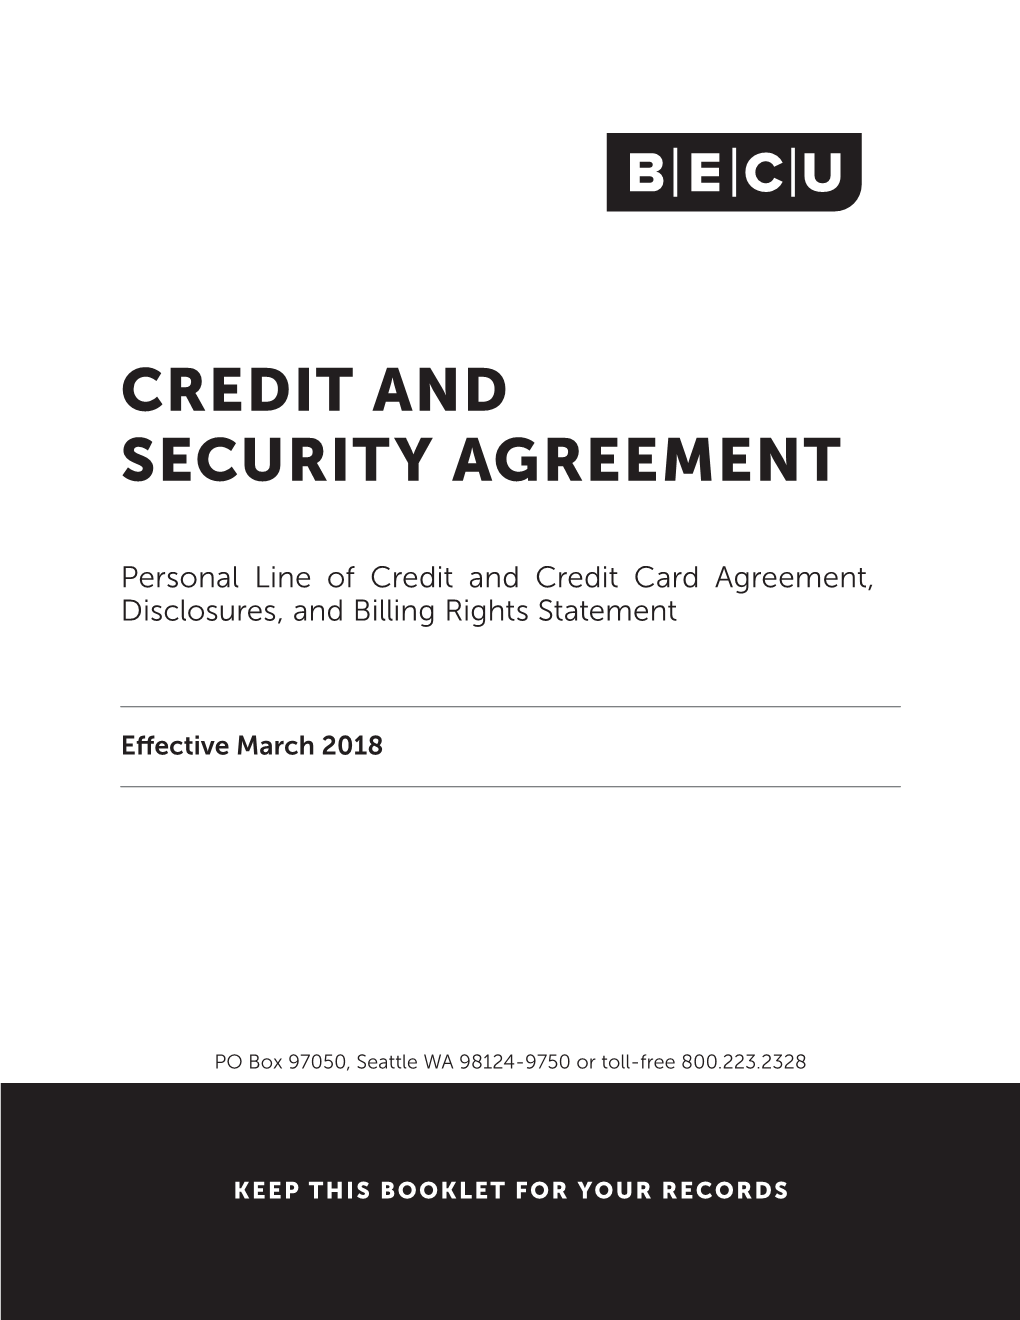 Master Credit Agreement Packet